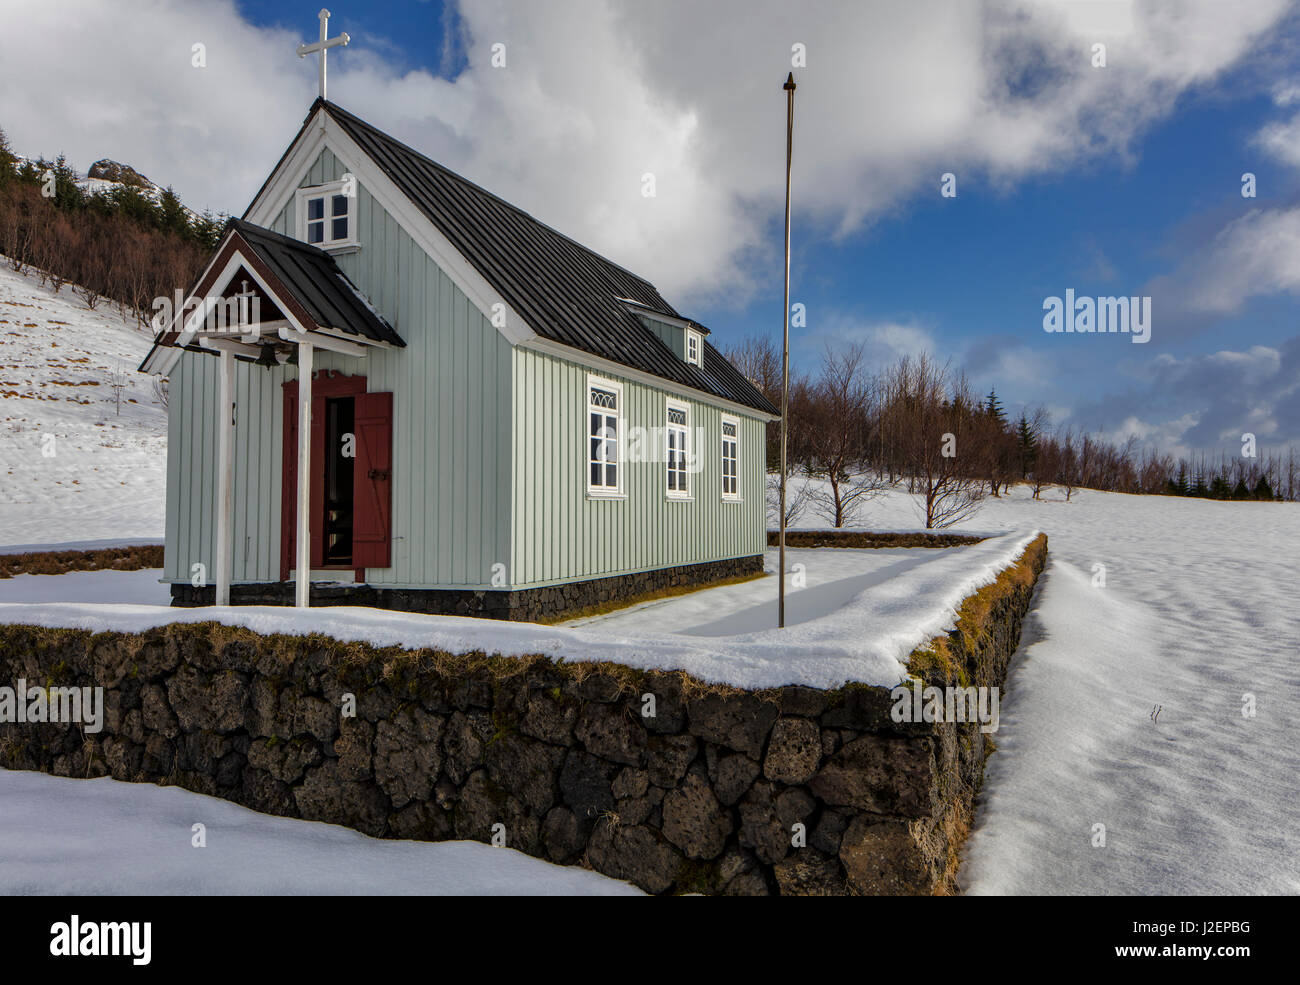 Historic Skogar church at the Skogar Folk Museum in Icleand (Large format sizes available) Stock Photo